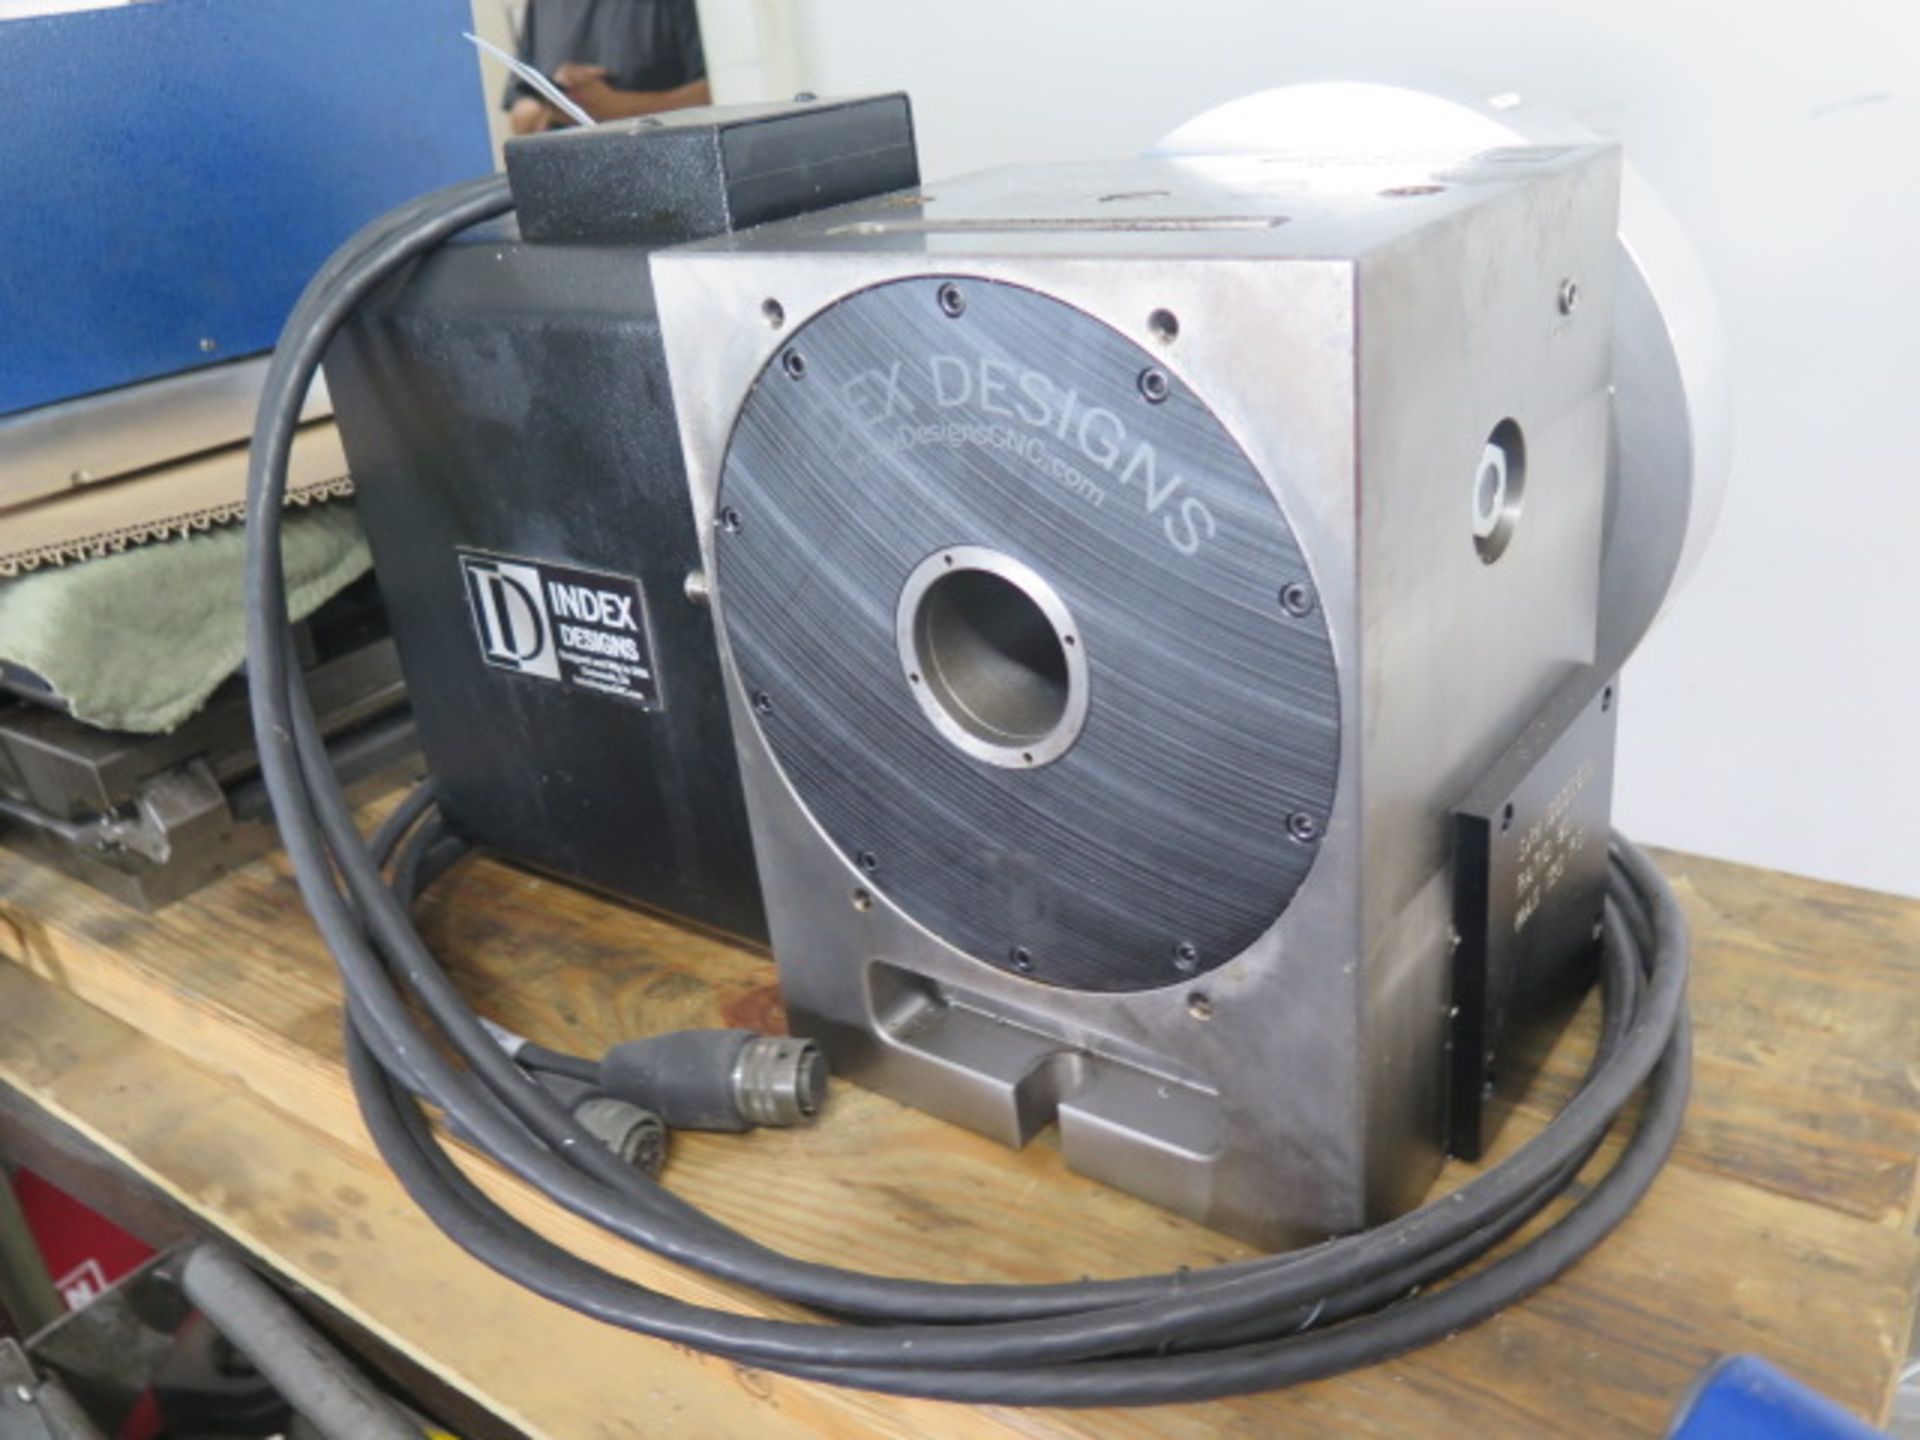 Index Designs 4th Axis 8” Rotary Head s/n ID000610 w/ Calmotion USB Indexer, 90:1 Ratio, SOLD AS IS - Image 3 of 11